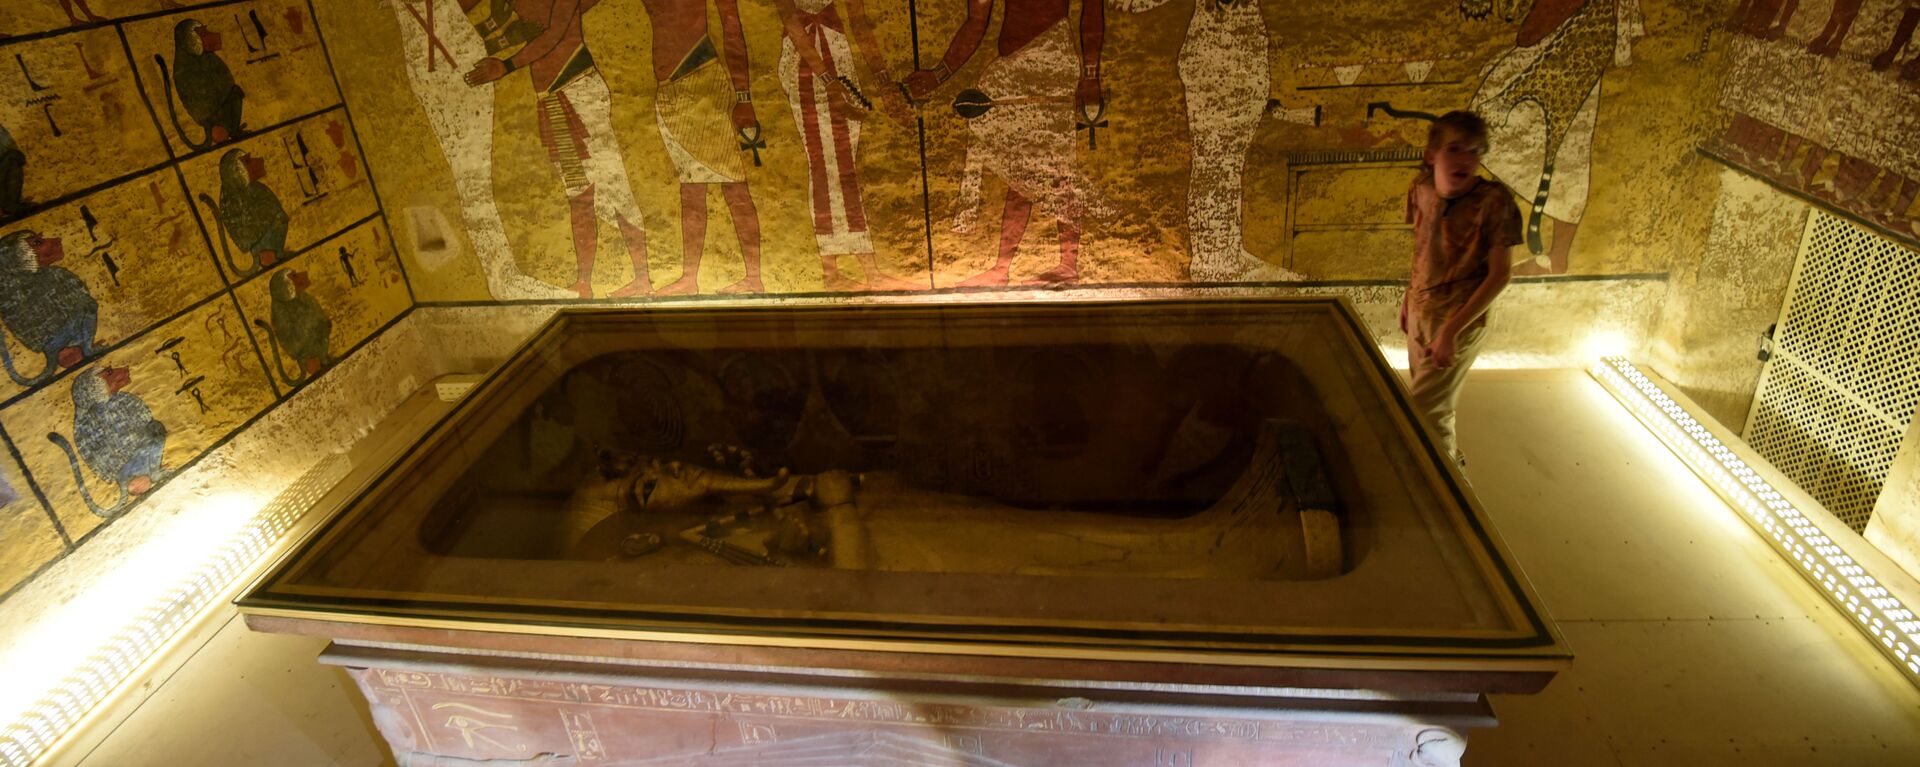 A picture taken on April 1, 2016, shows the golden sarcophagus of King Tutankhamun displayed in his burial chamber in the Valley of the Kings, close to Luxor, 500 kms south of the Egyptian capital Cairo - Sputnik International, 1920, 30.11.2019